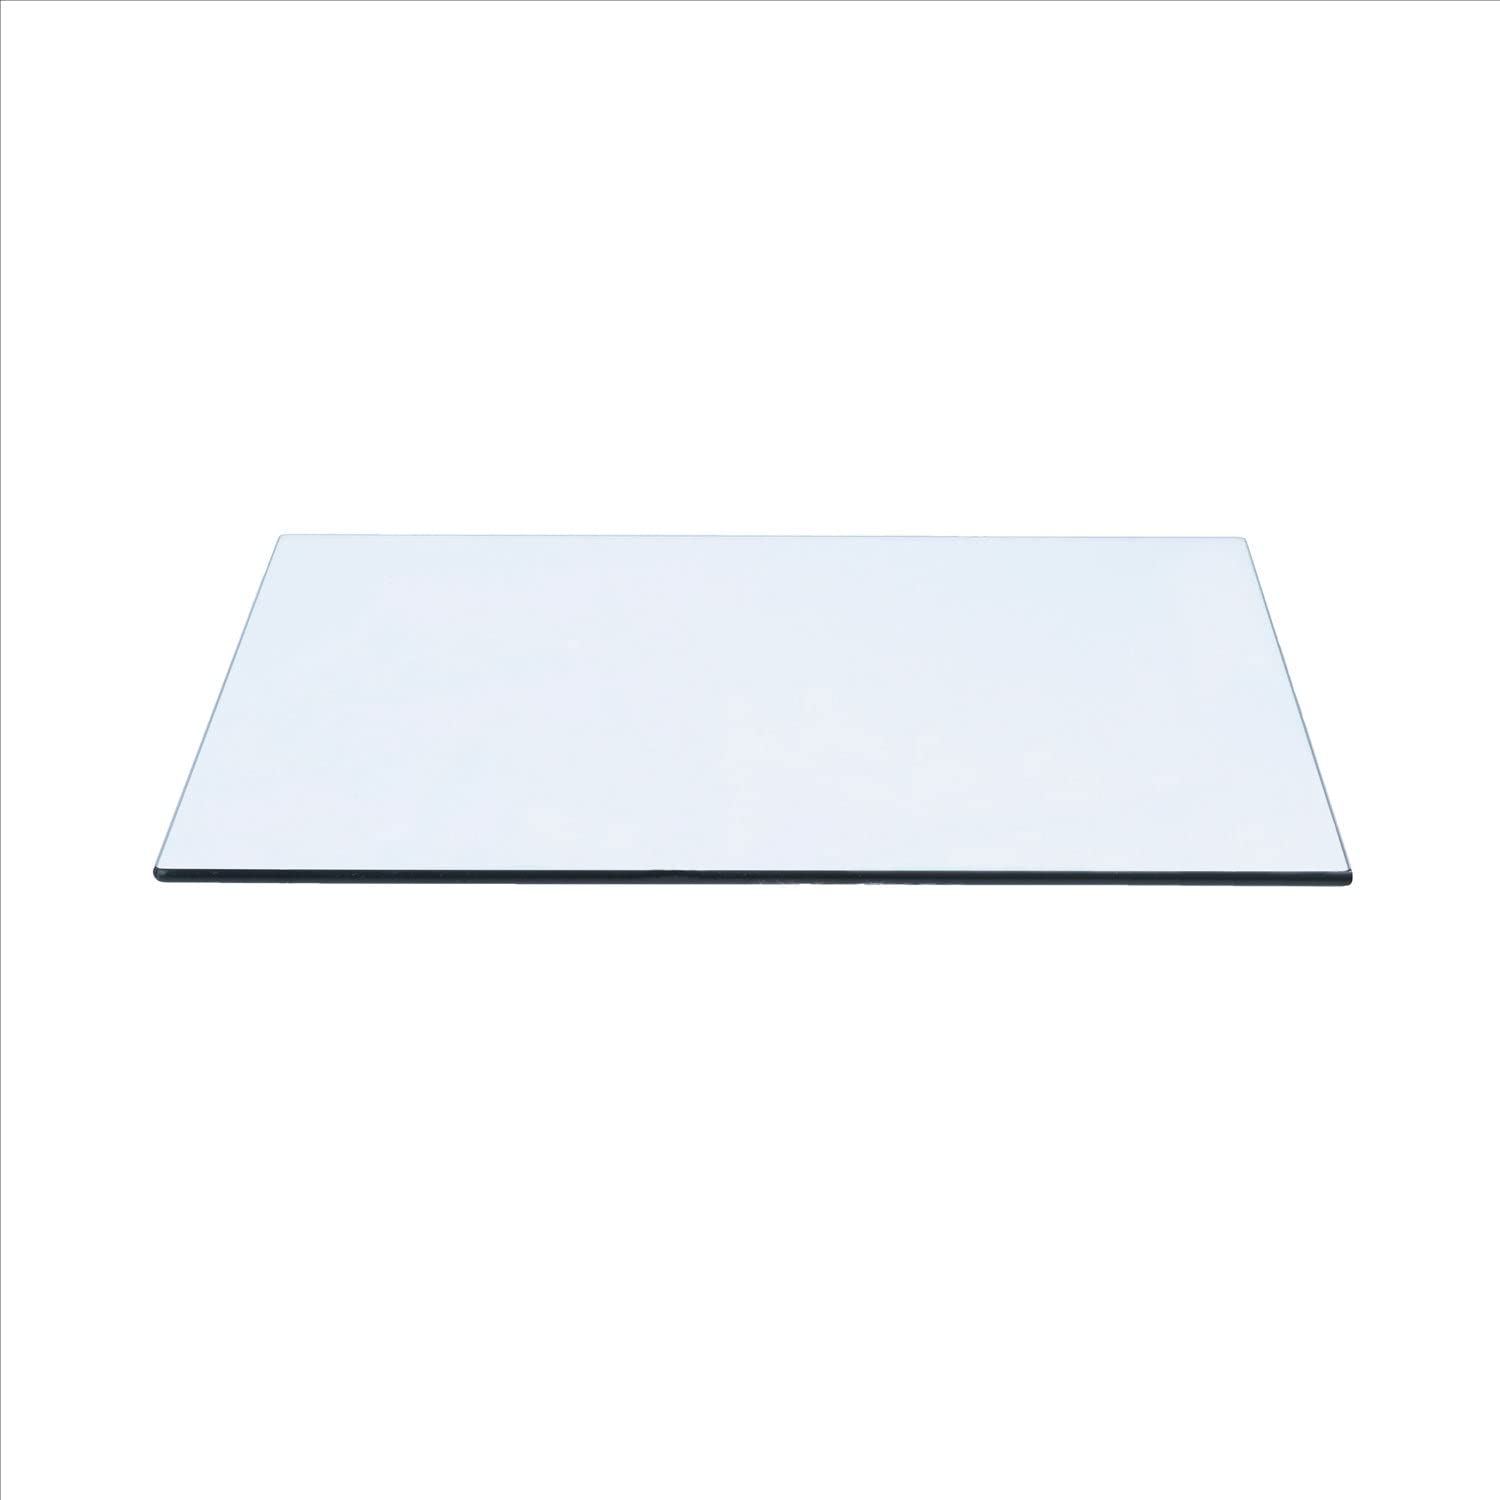 Spancraft 20 x 34 Rectangle Tempered glass Table Top 38 Thick Flat Polish Edge and Touch corners